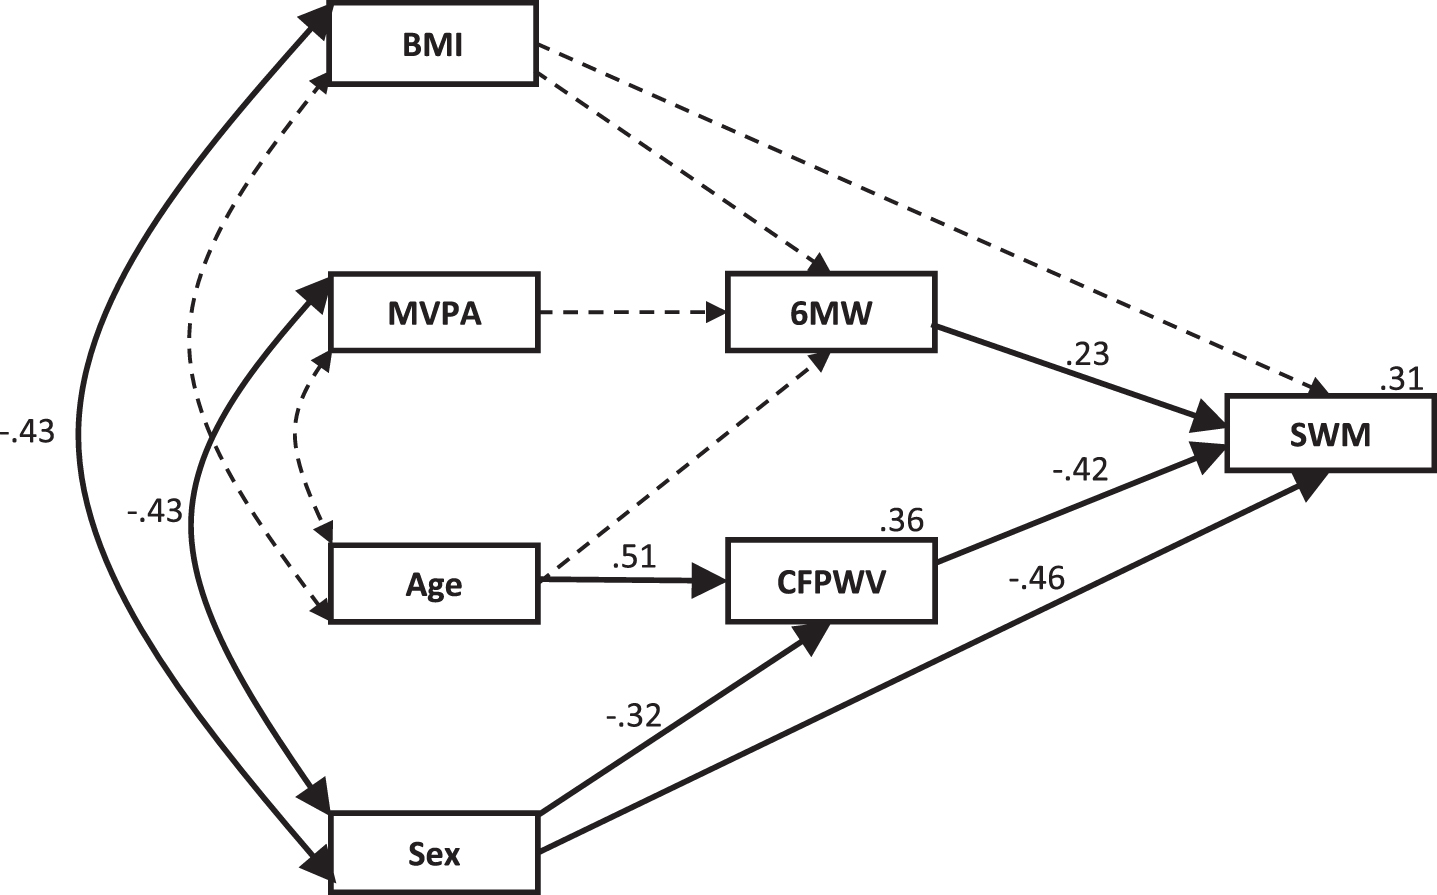 Higher-fitness model for the physical fitness and arterial stiffness contribution to the variability in SWM with the addition of moderate exercise. Standardized regression coefficients (β) are shown for each path and the percentage of variation explained is shown for each dependent variable. Dotted lines indicate non-significant pathways that were significant in the overall model. BMI, body mass index; MVPA, moderate-to-vigorous physical activity; 6 MW, six-minute walk test; CFPWV, carotid-femoral pulse wave velocity; SWM, spatial working memory.